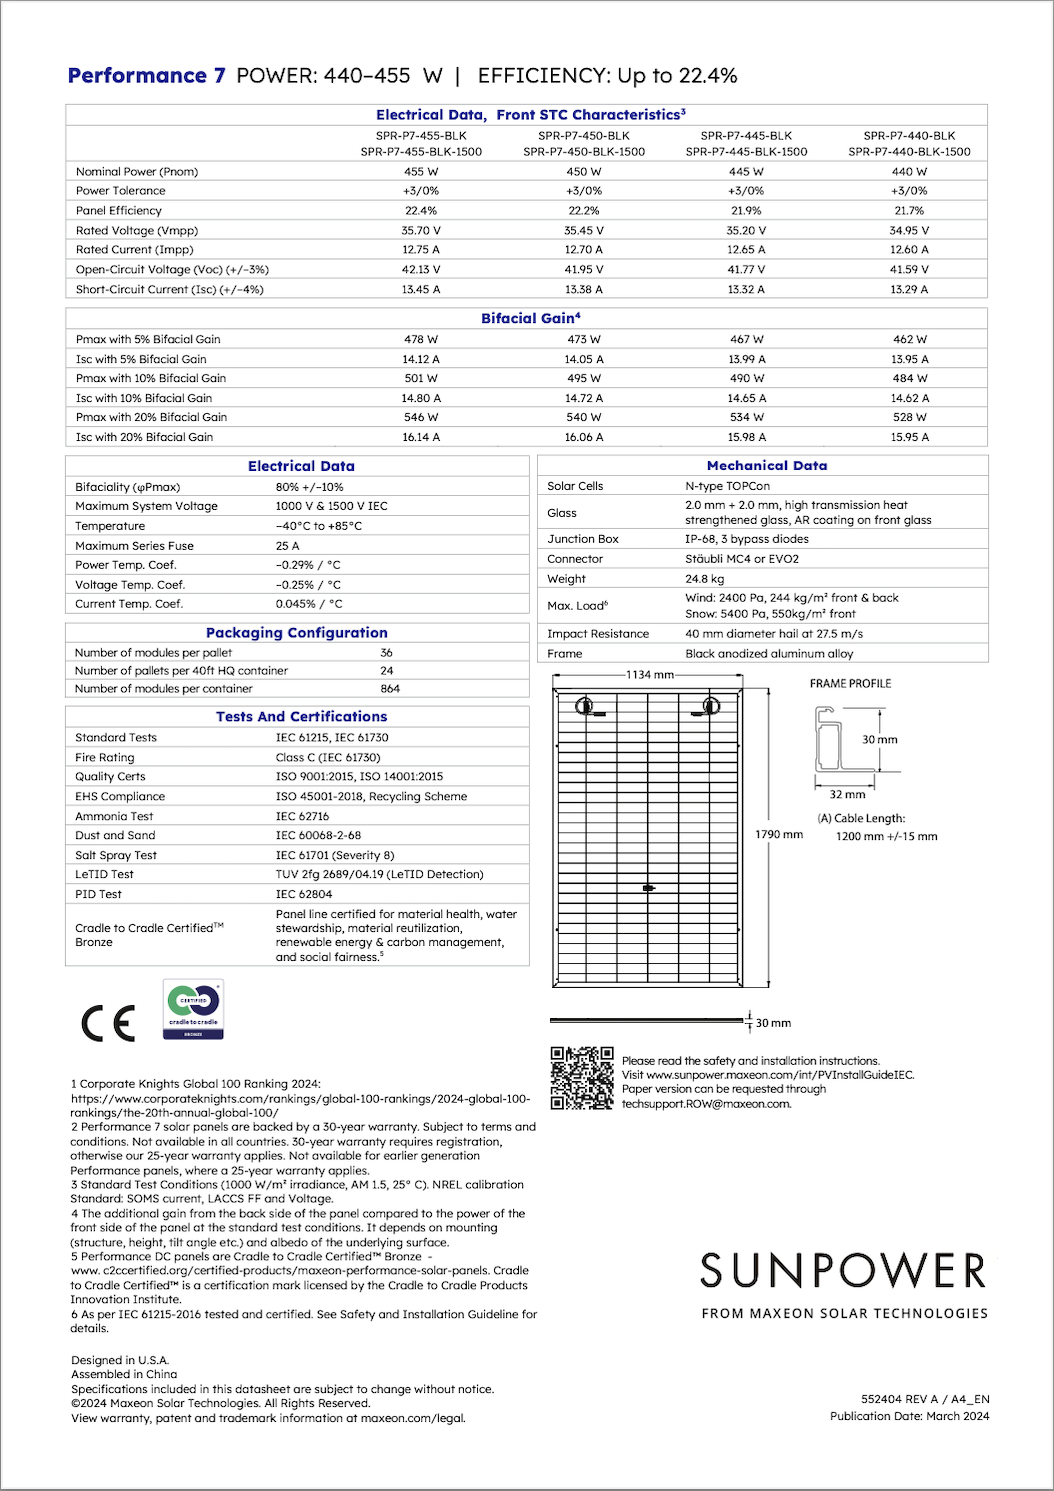 Comprehensive datasheet for the SunPower Performance 7 Home Solar Panel, detailing its specifications and features. This image presents electrical data including nominal power of 440–455W, panel efficiency up to 22.4%, and various operational parameters like voltage and current under different conditions. Mechanical specifications such as dimensions, weight, and solar cell type (N-type TOPCon) are included, along with a frame profile diagram. Additionally, the datasheet outlines packaging configurations, standard tests and certifications, and a 'Cradle to Cradle Certified™ Bronze' for environmental responsibility. The datasheet is aimed at both consumers and industry professionals, emphasizing the solar panel's high efficiency, robust construction, and sustainability features.